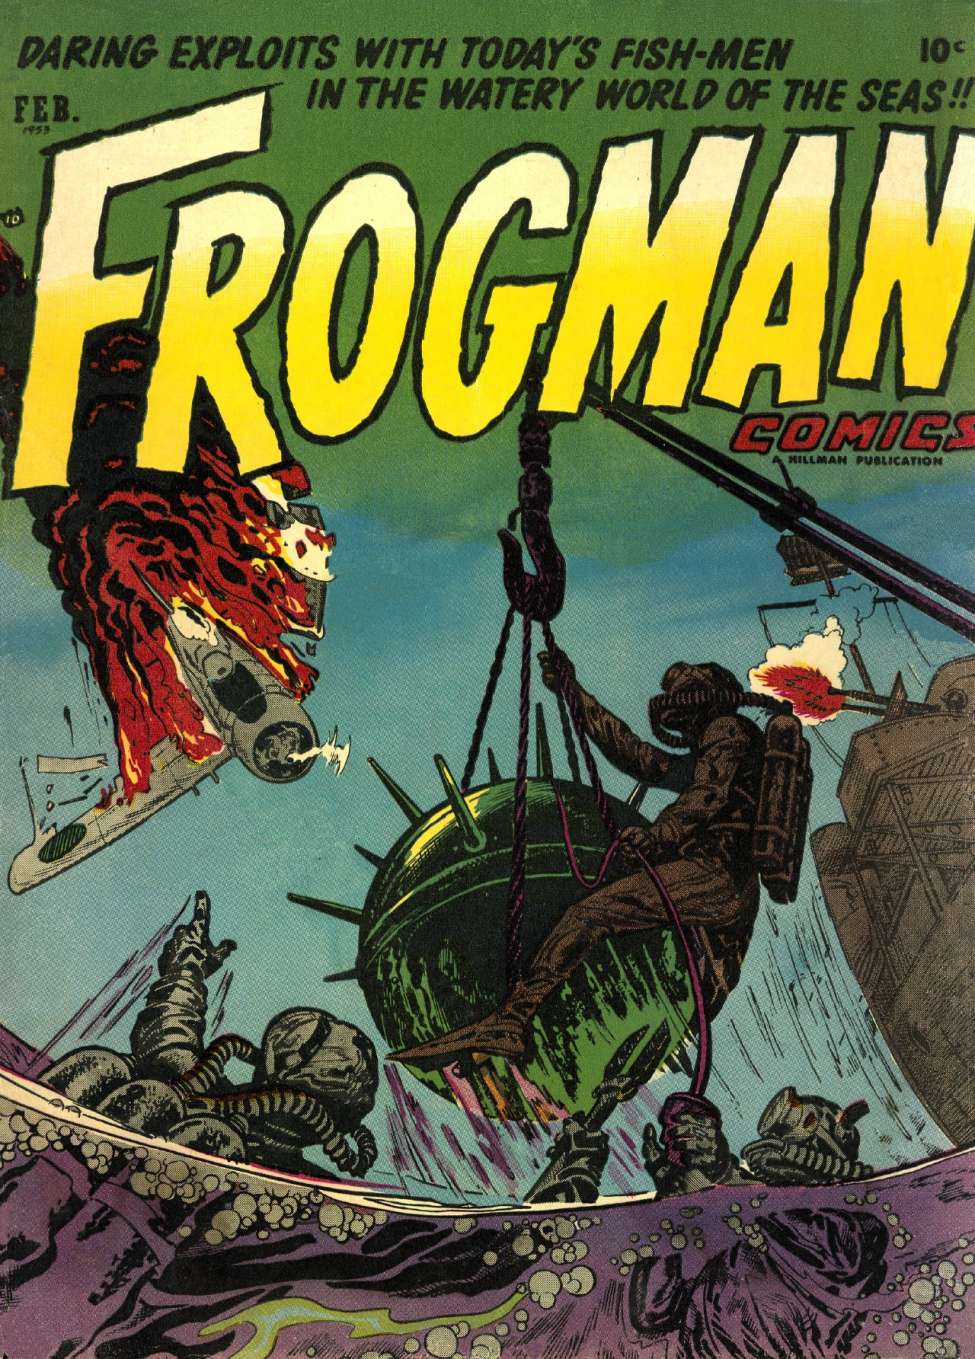 Book Cover For Frogman Comics 8